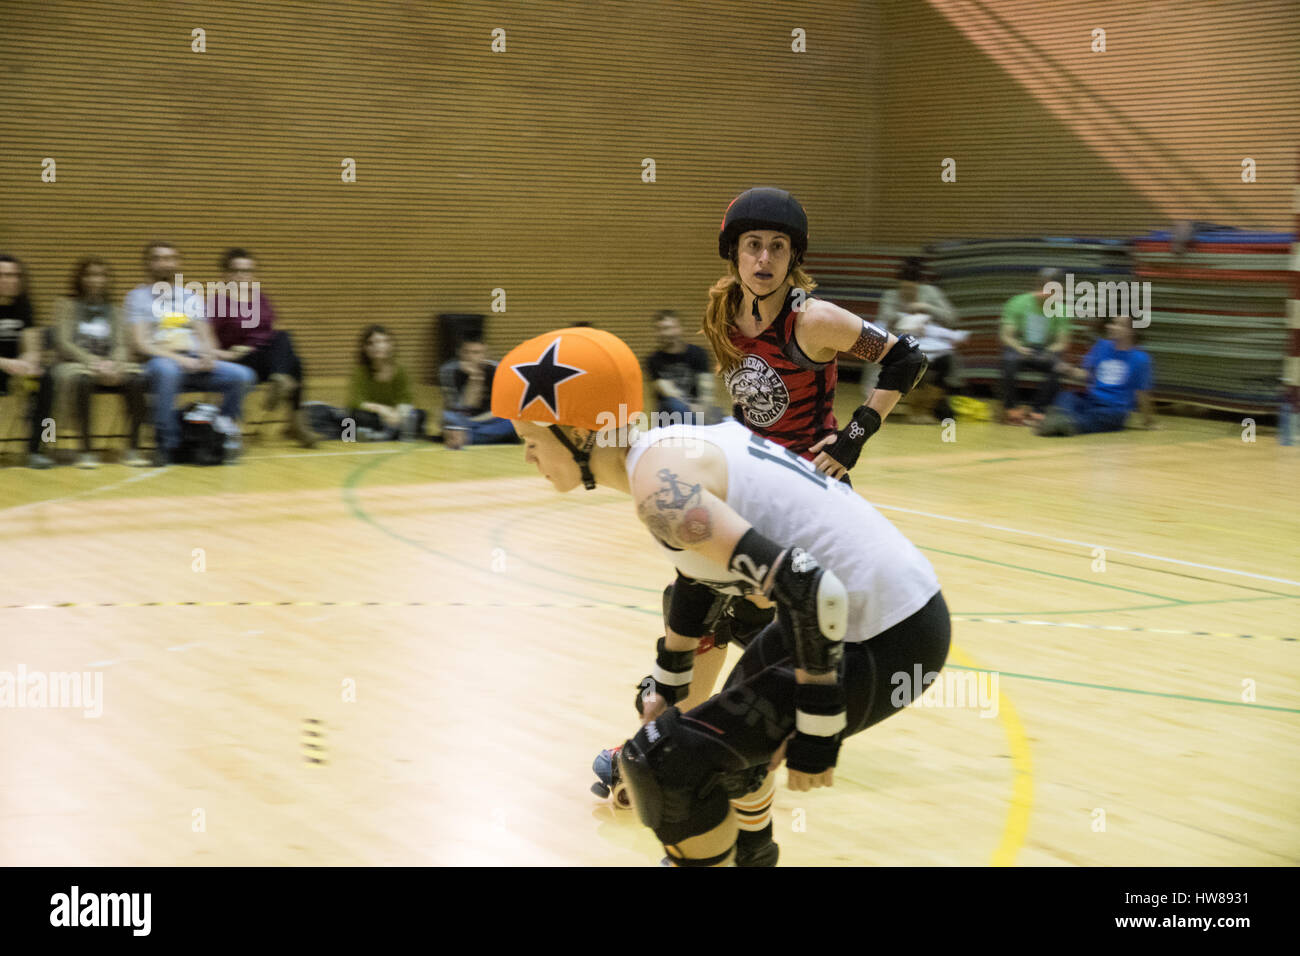 Madrid, Spain. 18th March, 2017. Jammer of Roller Derby Madrid A, #15 Furia  Poligonera, ending the jam just before the jammer of Oslo Roller Derby  Klubb, #12 Eda Lyngra, reach her. ©